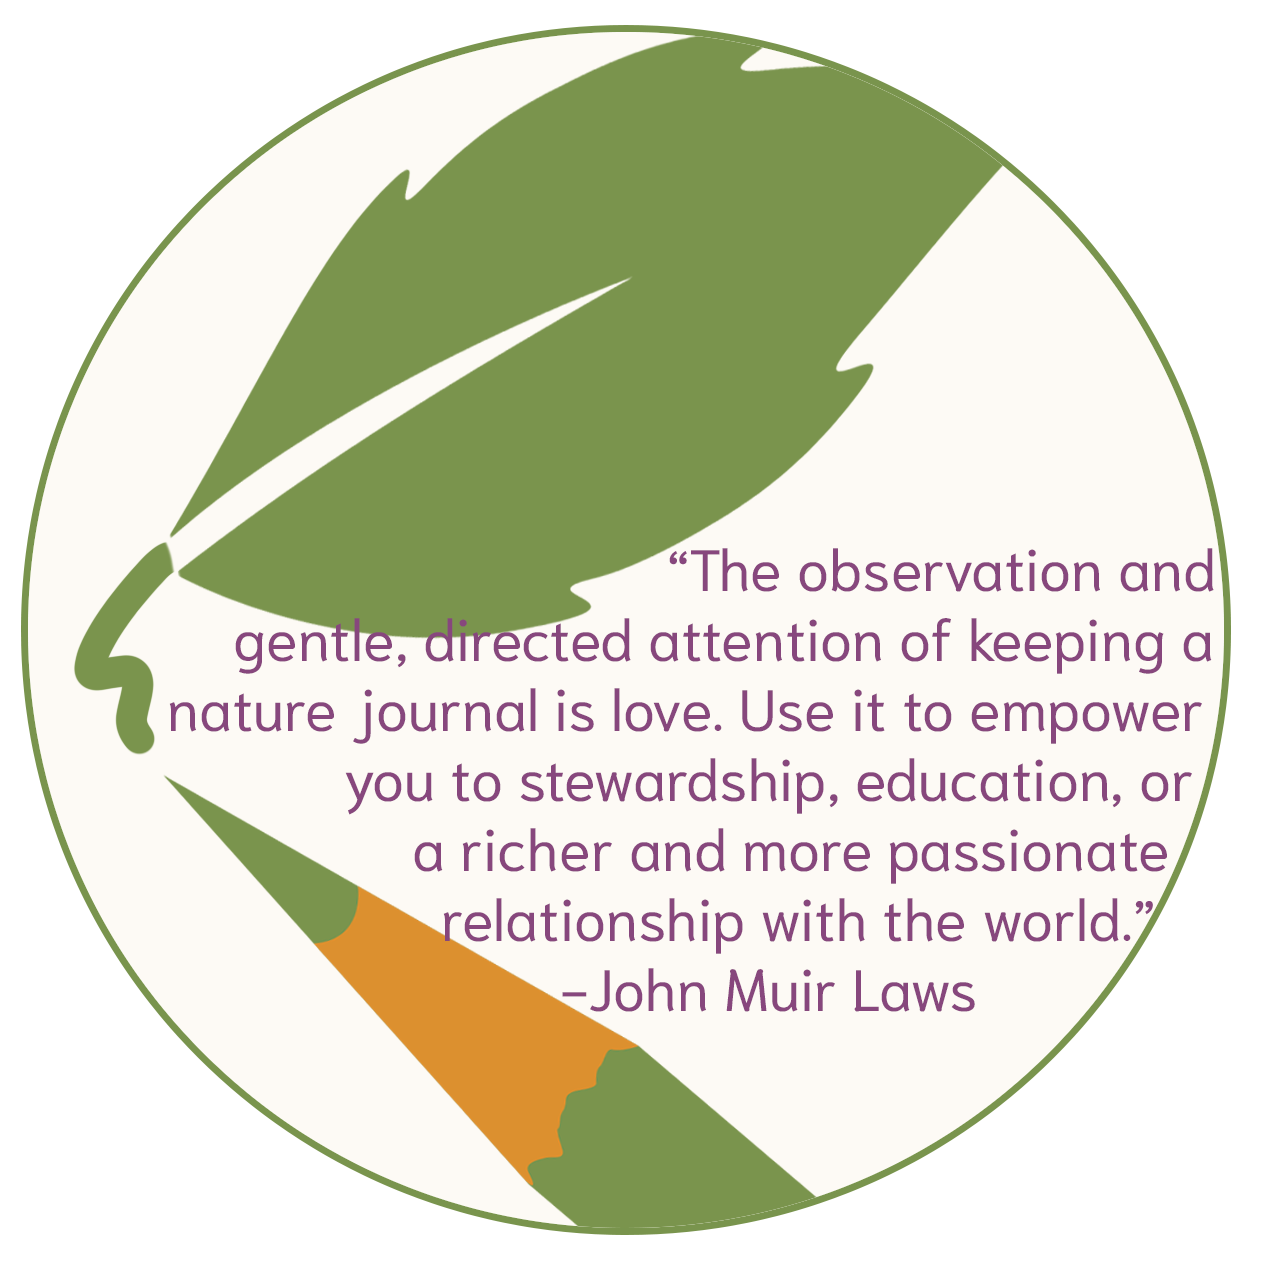 "The observation and gentle, directed attention of keeping a nature journal is love. Use it to empower you to stewardship, education, or a richer and more passionate relationship with the world." -John Muir Laws